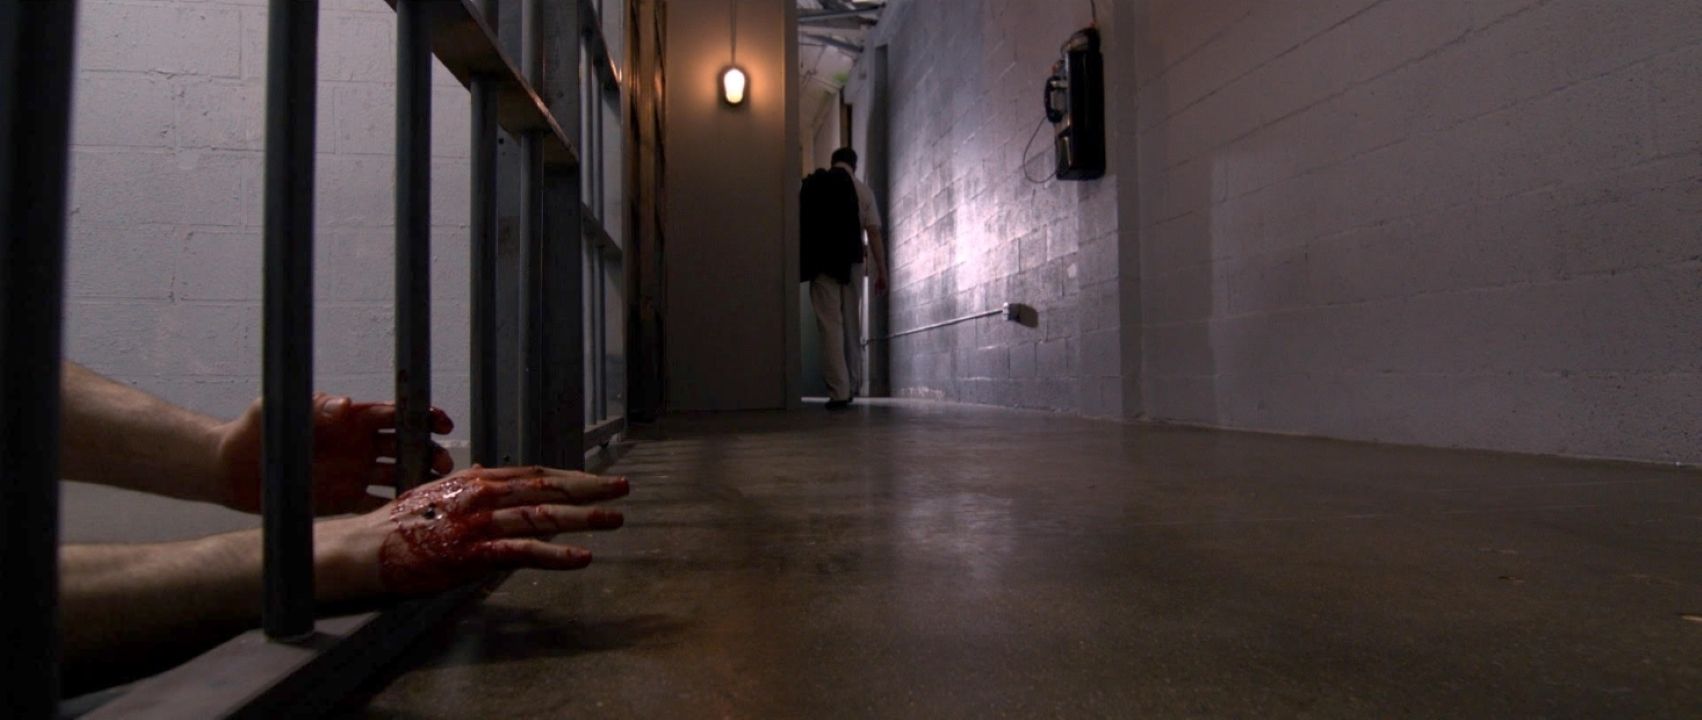 A bloody hand lays outside a prison cell in the hallway